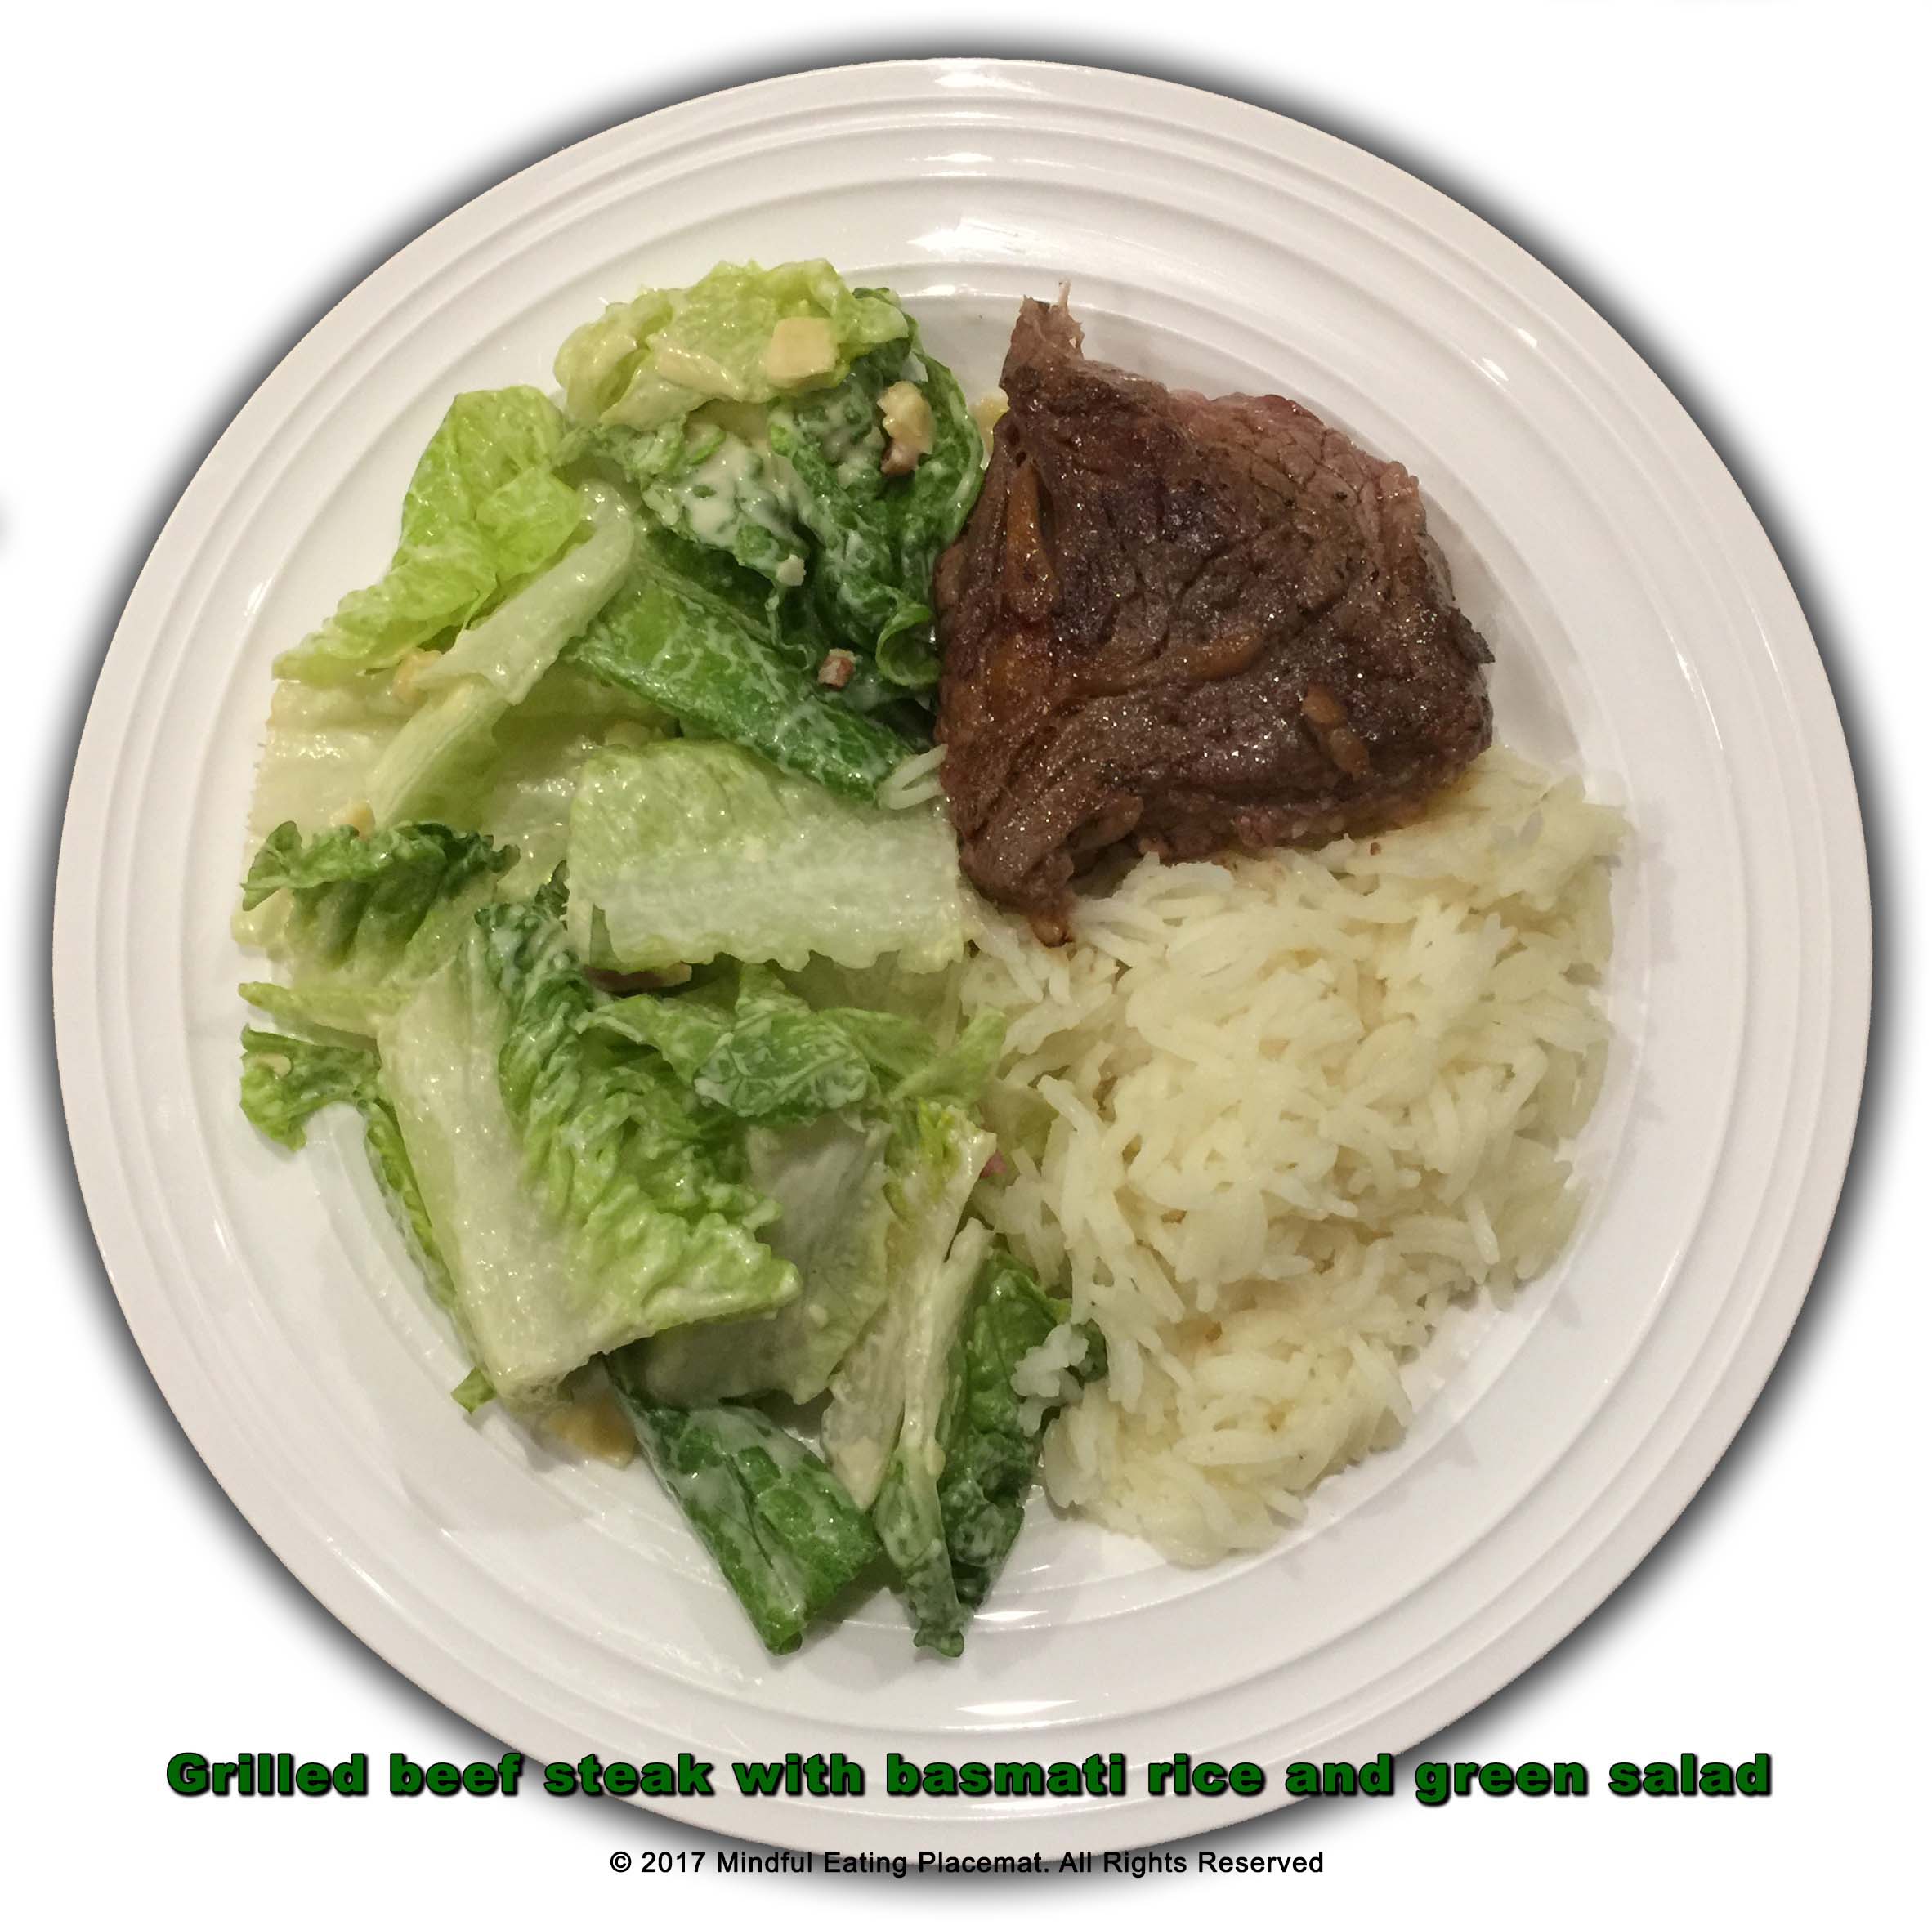 Beef steak with basmati rice and green salad